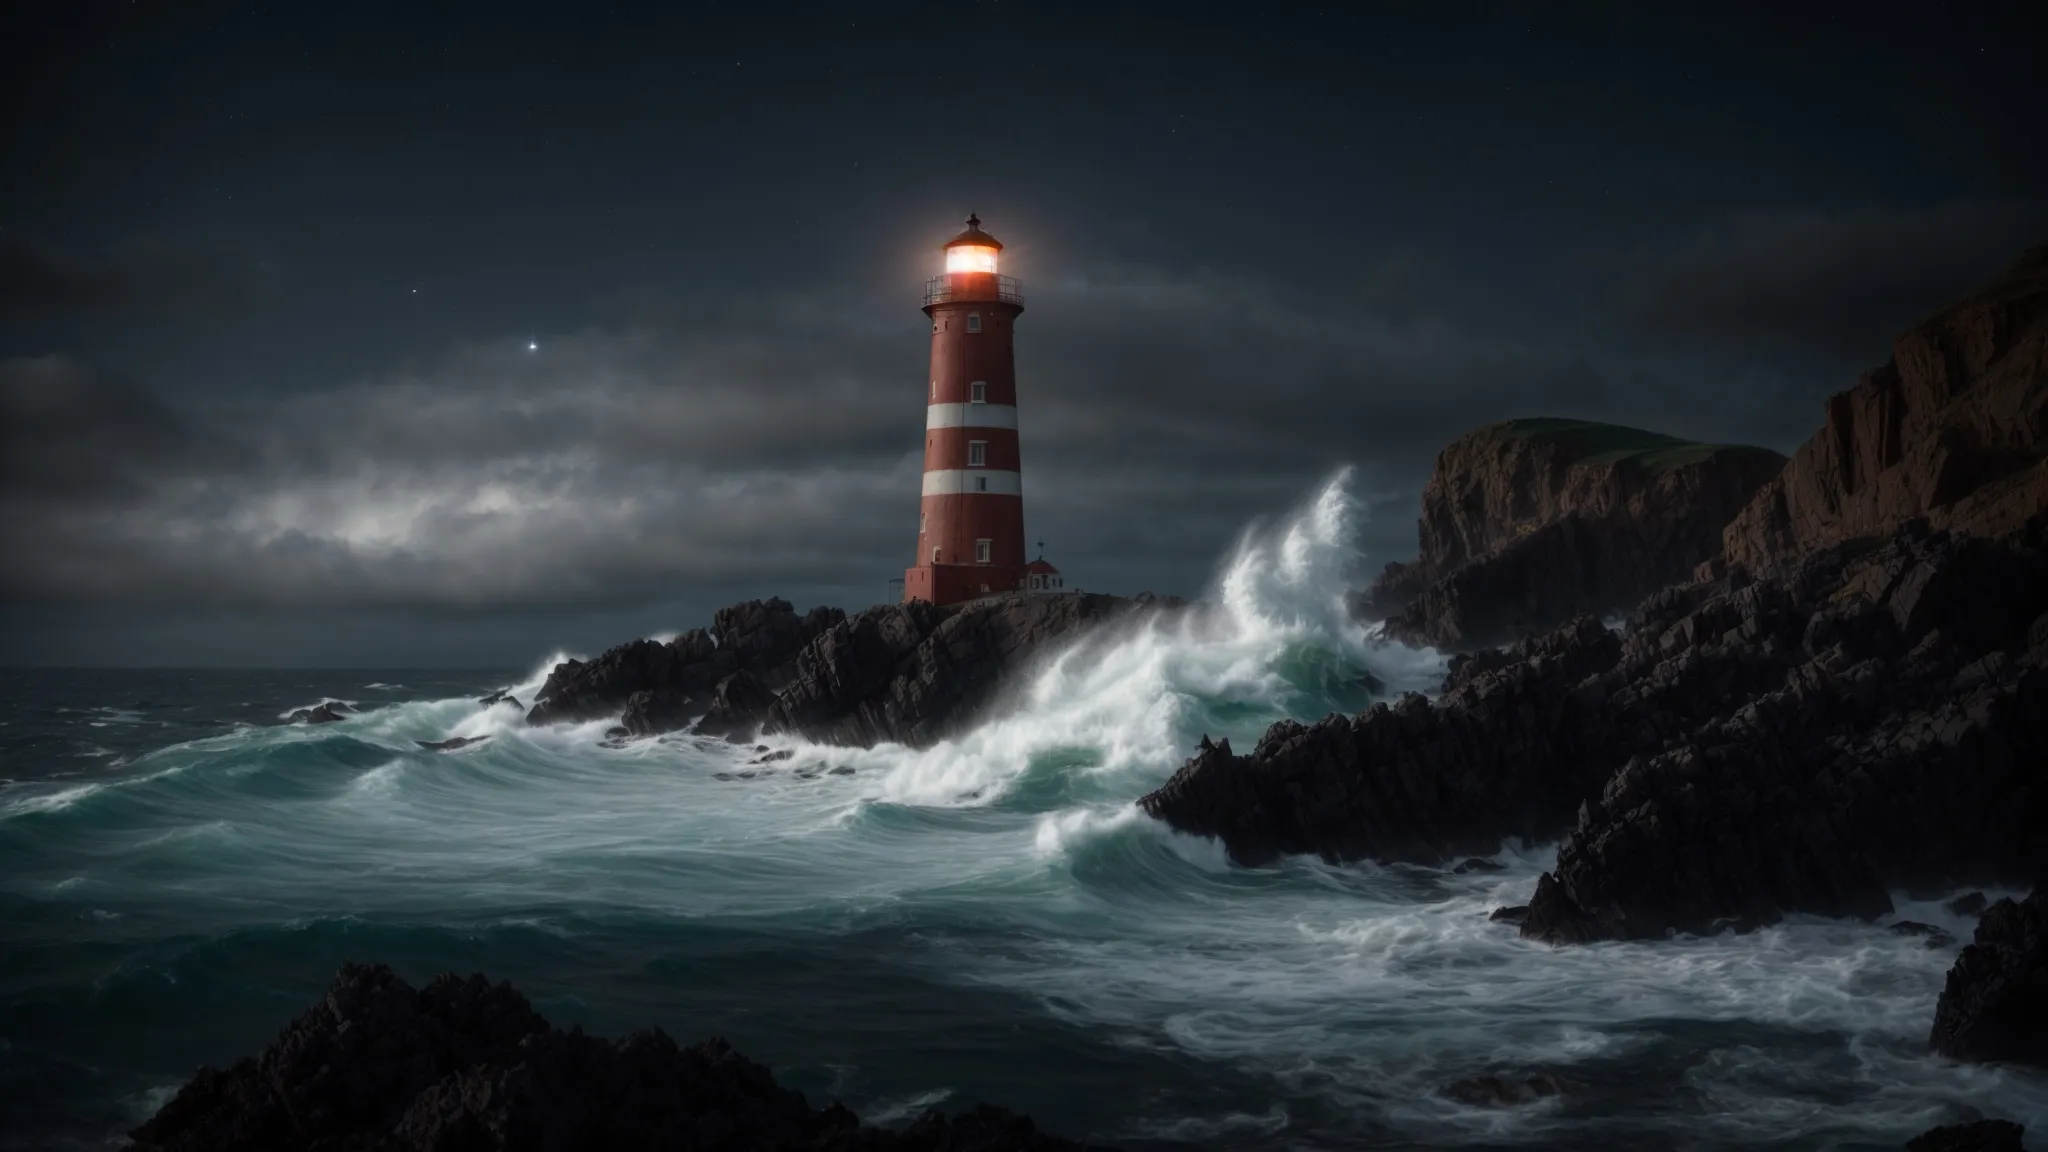 a lighthouse standing firm on a rocky coastline, guiding ships safely through tumultuous seas under a starlit sky.